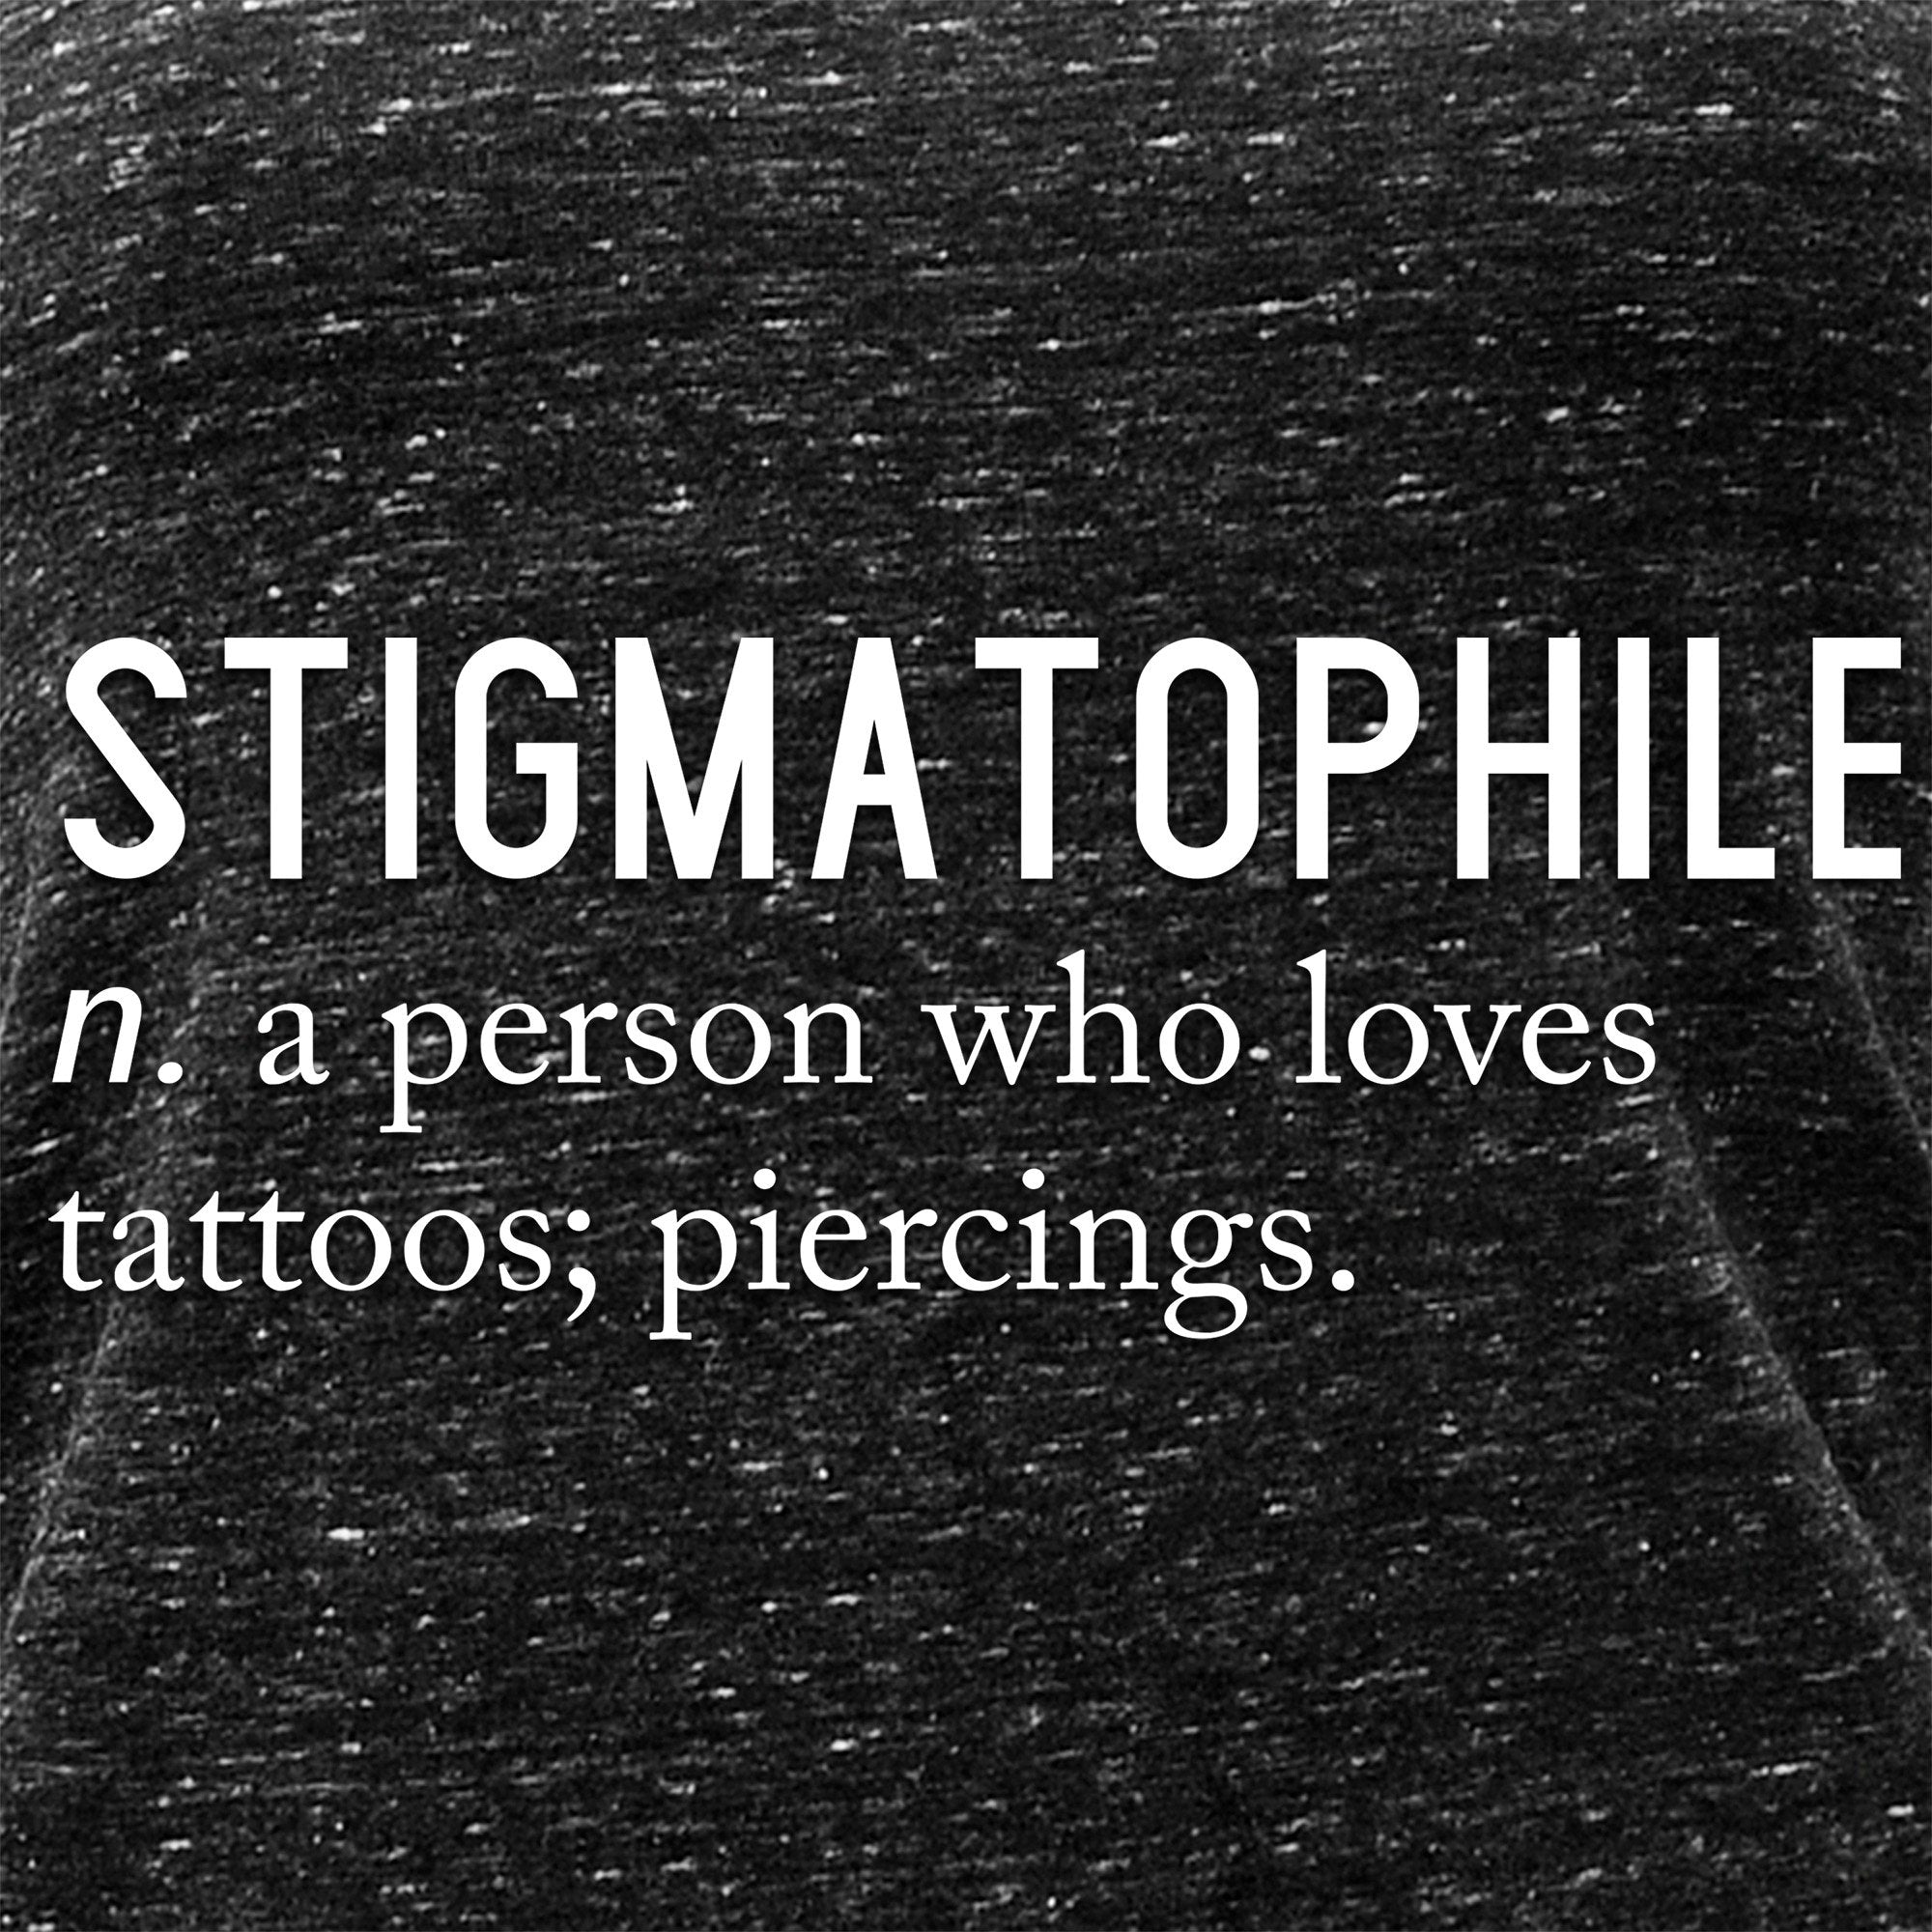 Stigmatophile n. a person who loves tattoos; piercings. Black Gray Cosmic Twist Back Tank Top